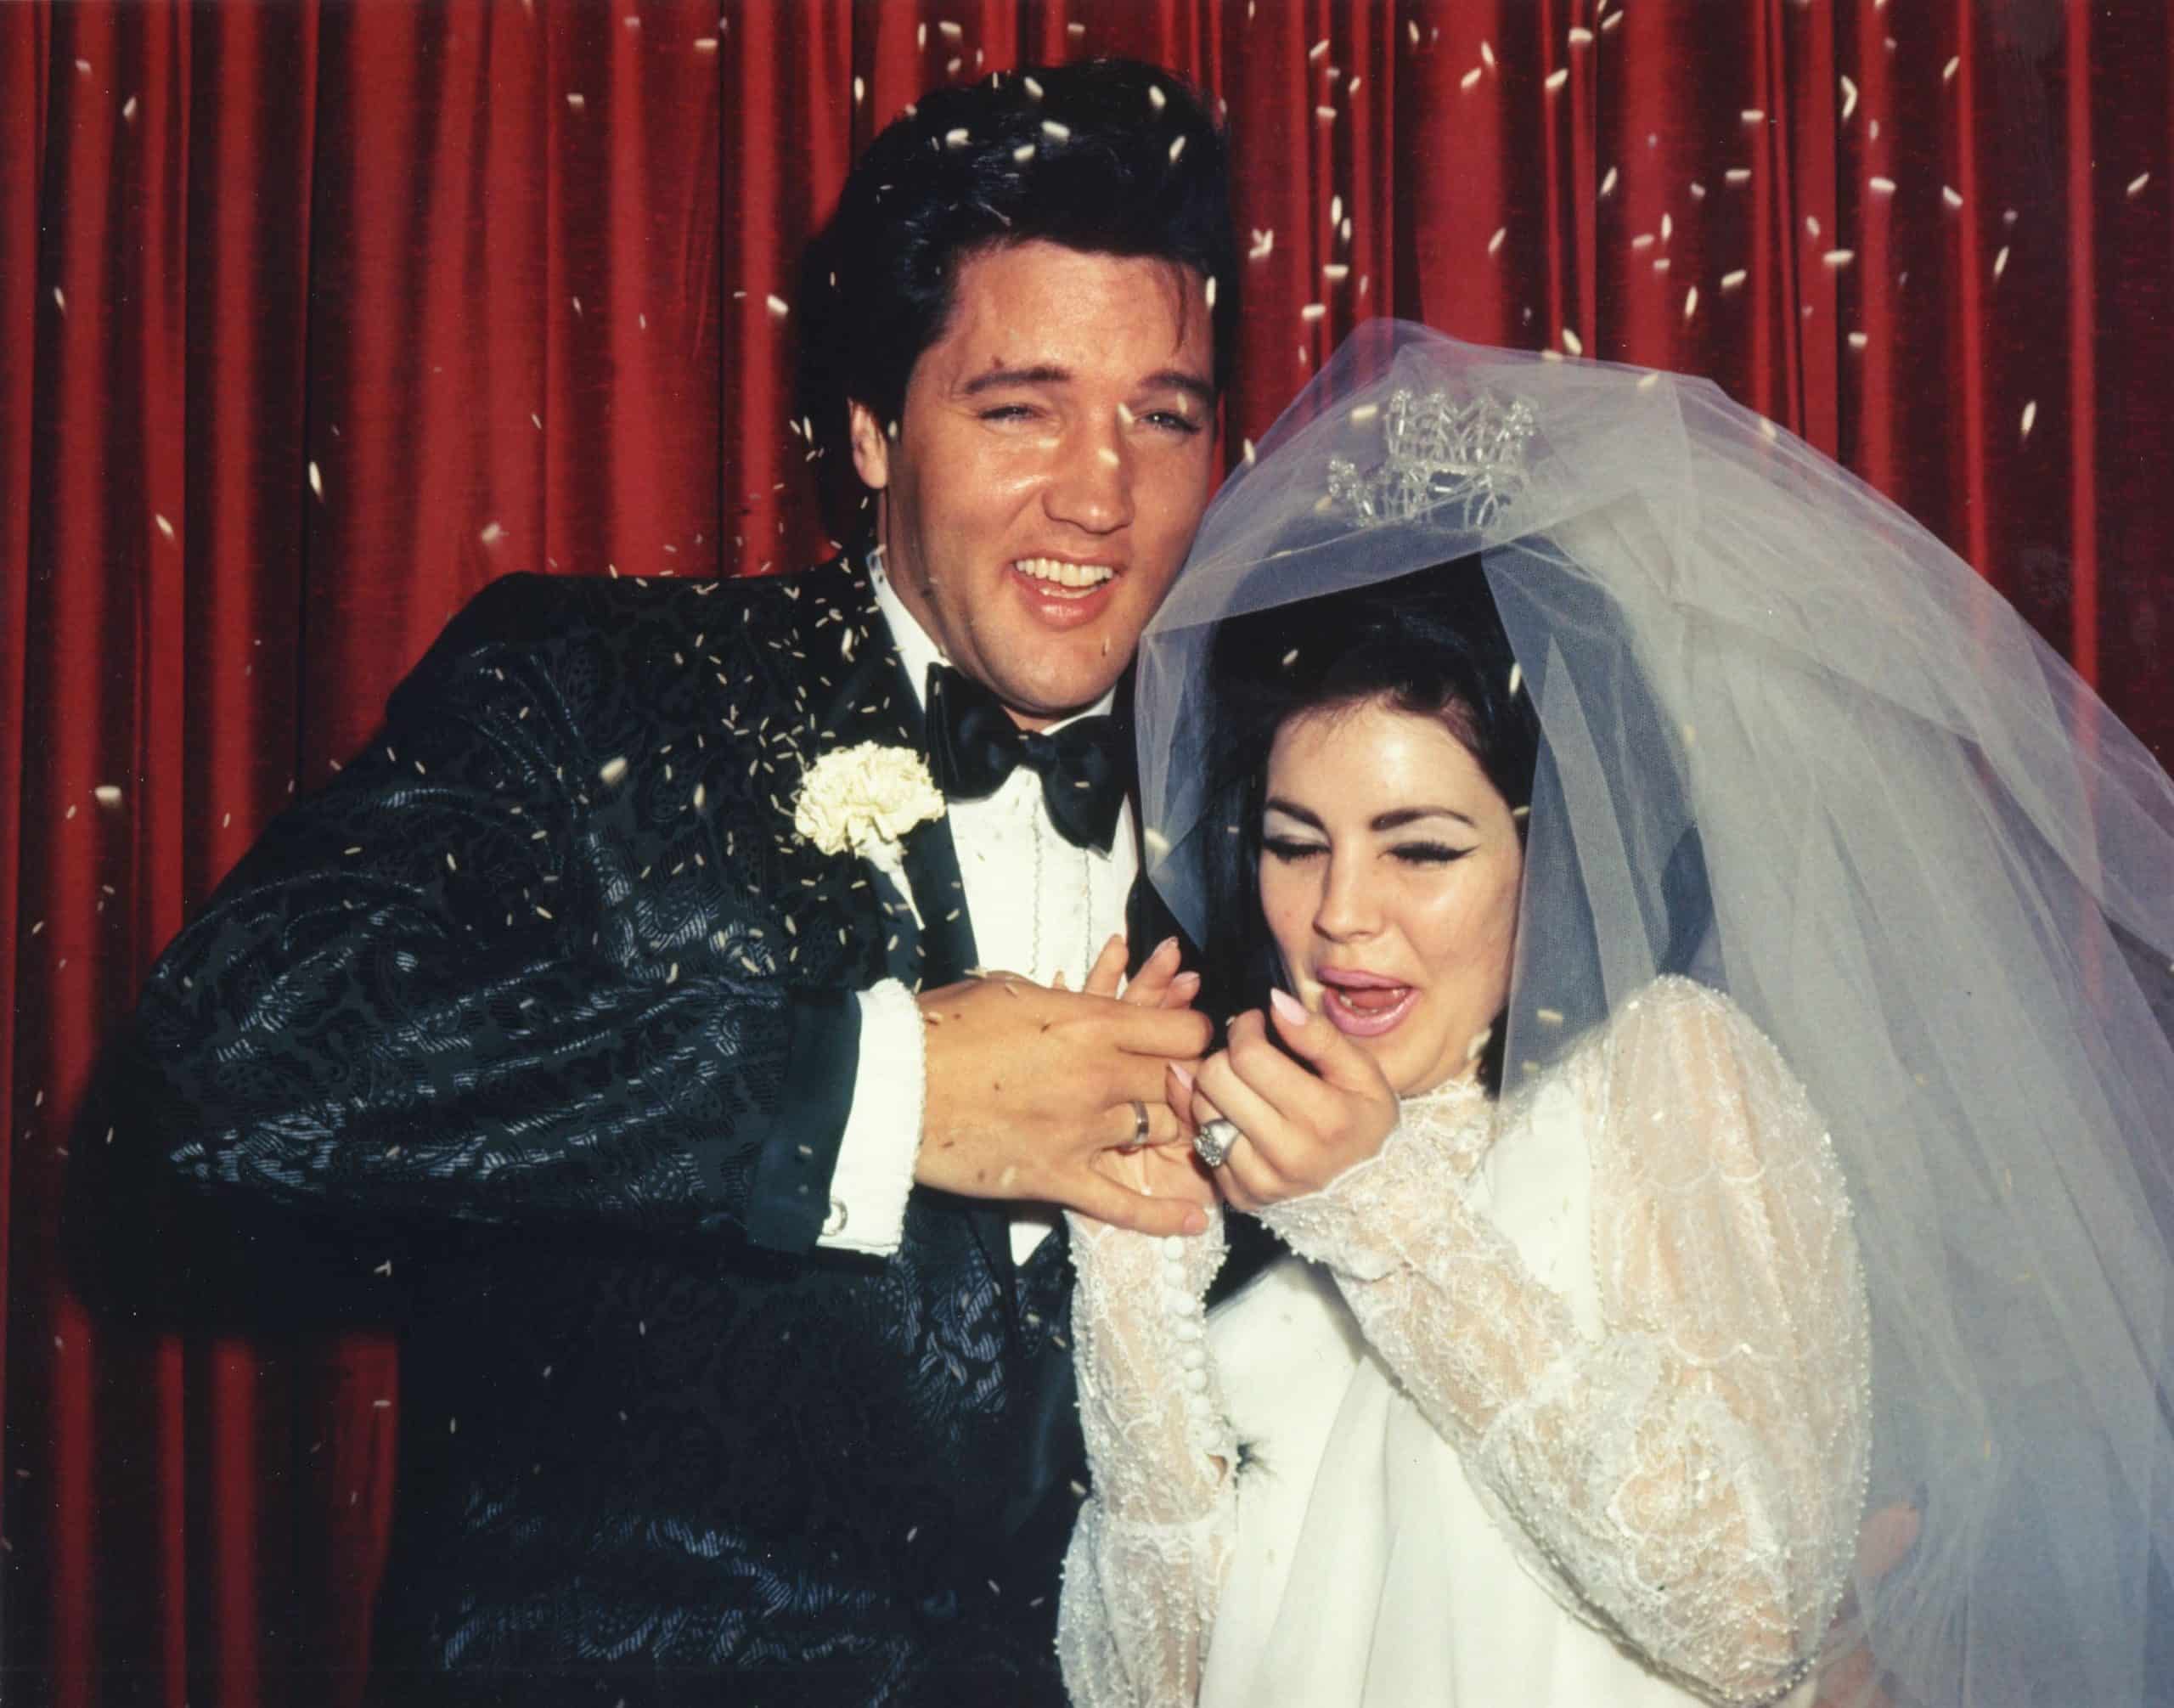 Elvis gave Priscilla a surprise gift when she moved to Memphis. Here, they're photographed at their 1967 wedding.